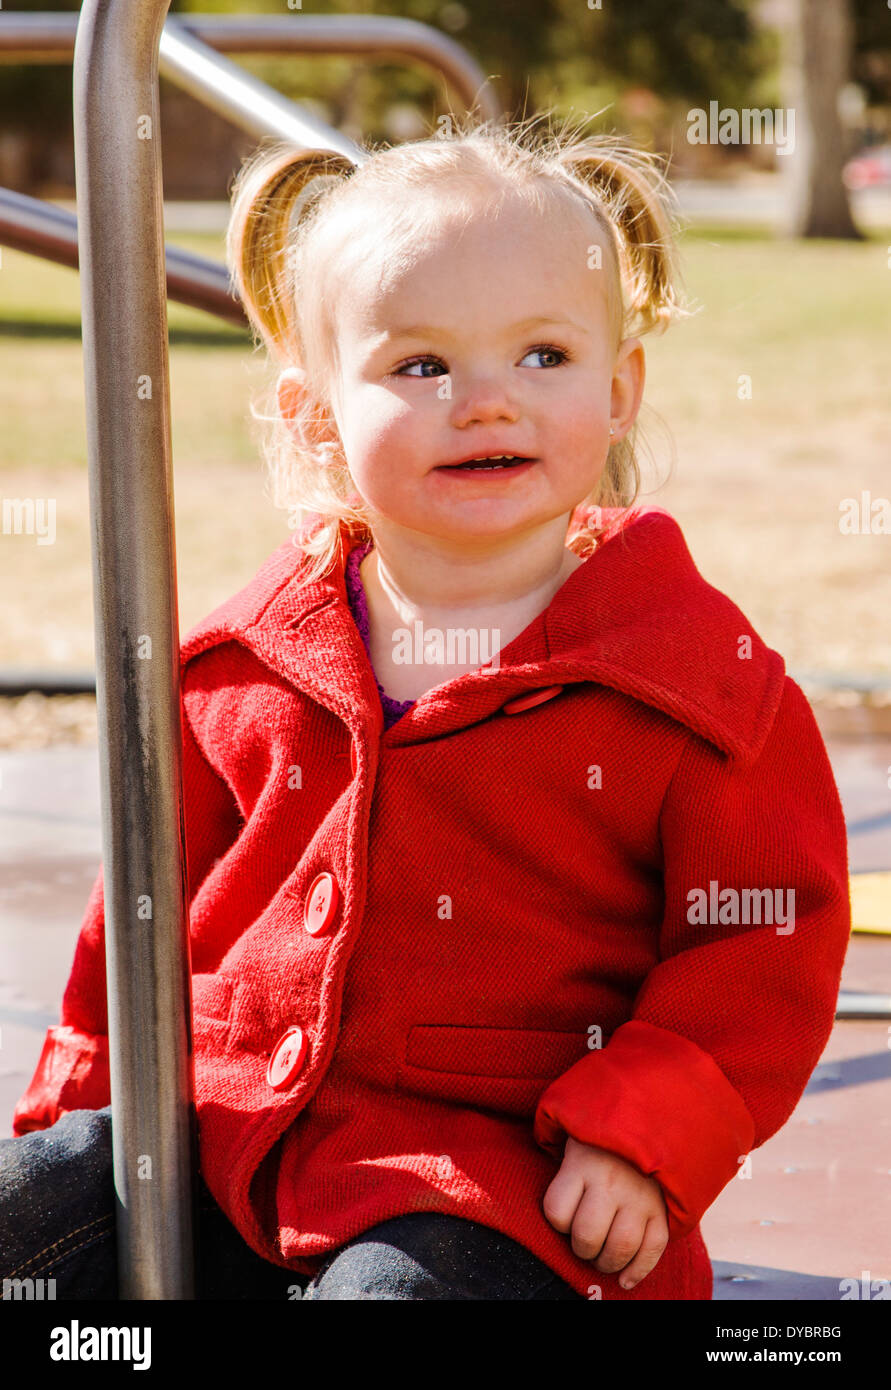 Cute, adorable 16 month little girl playing on a park playground Stock Photo